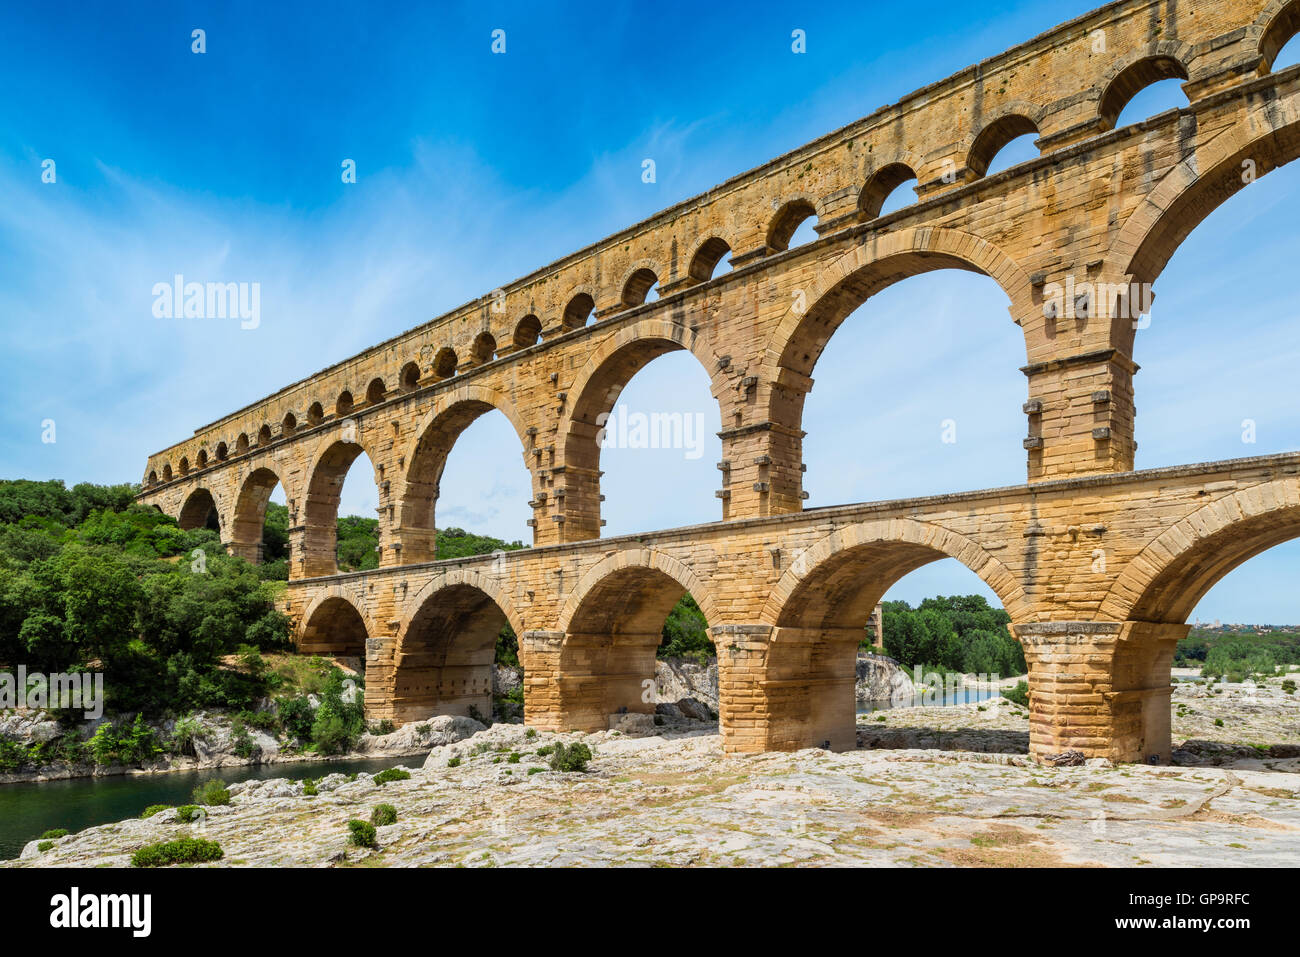 Pont Du Gard aqueduct in Southern France Stock Photo